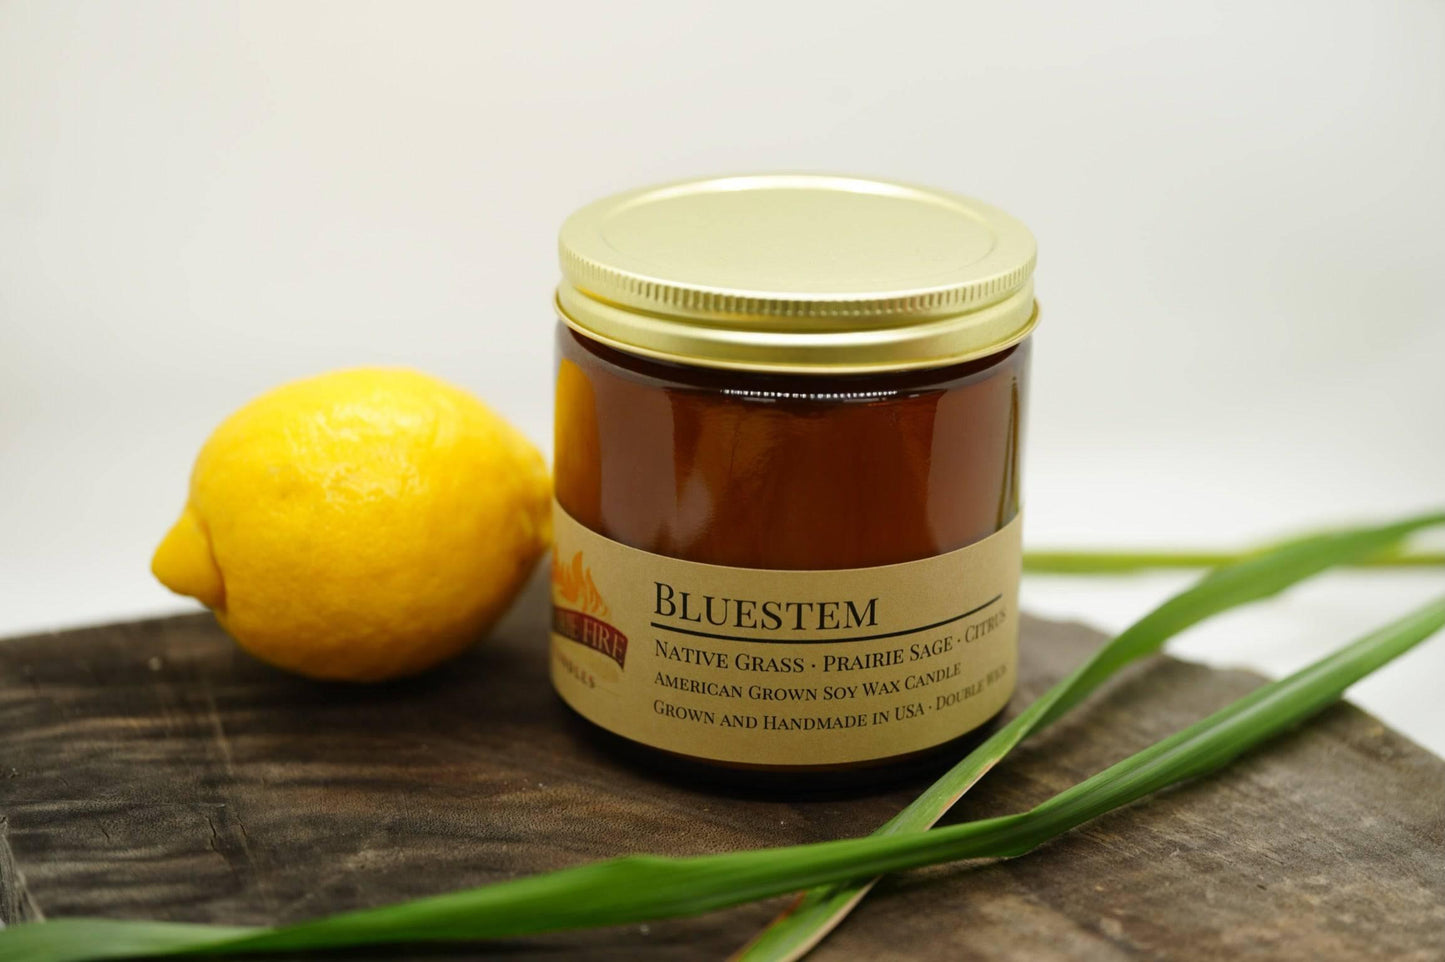 bluestem soy wax candle | 16 oz double wick amber apothecary jar candle by prairie fire tallow, candles, and lavender